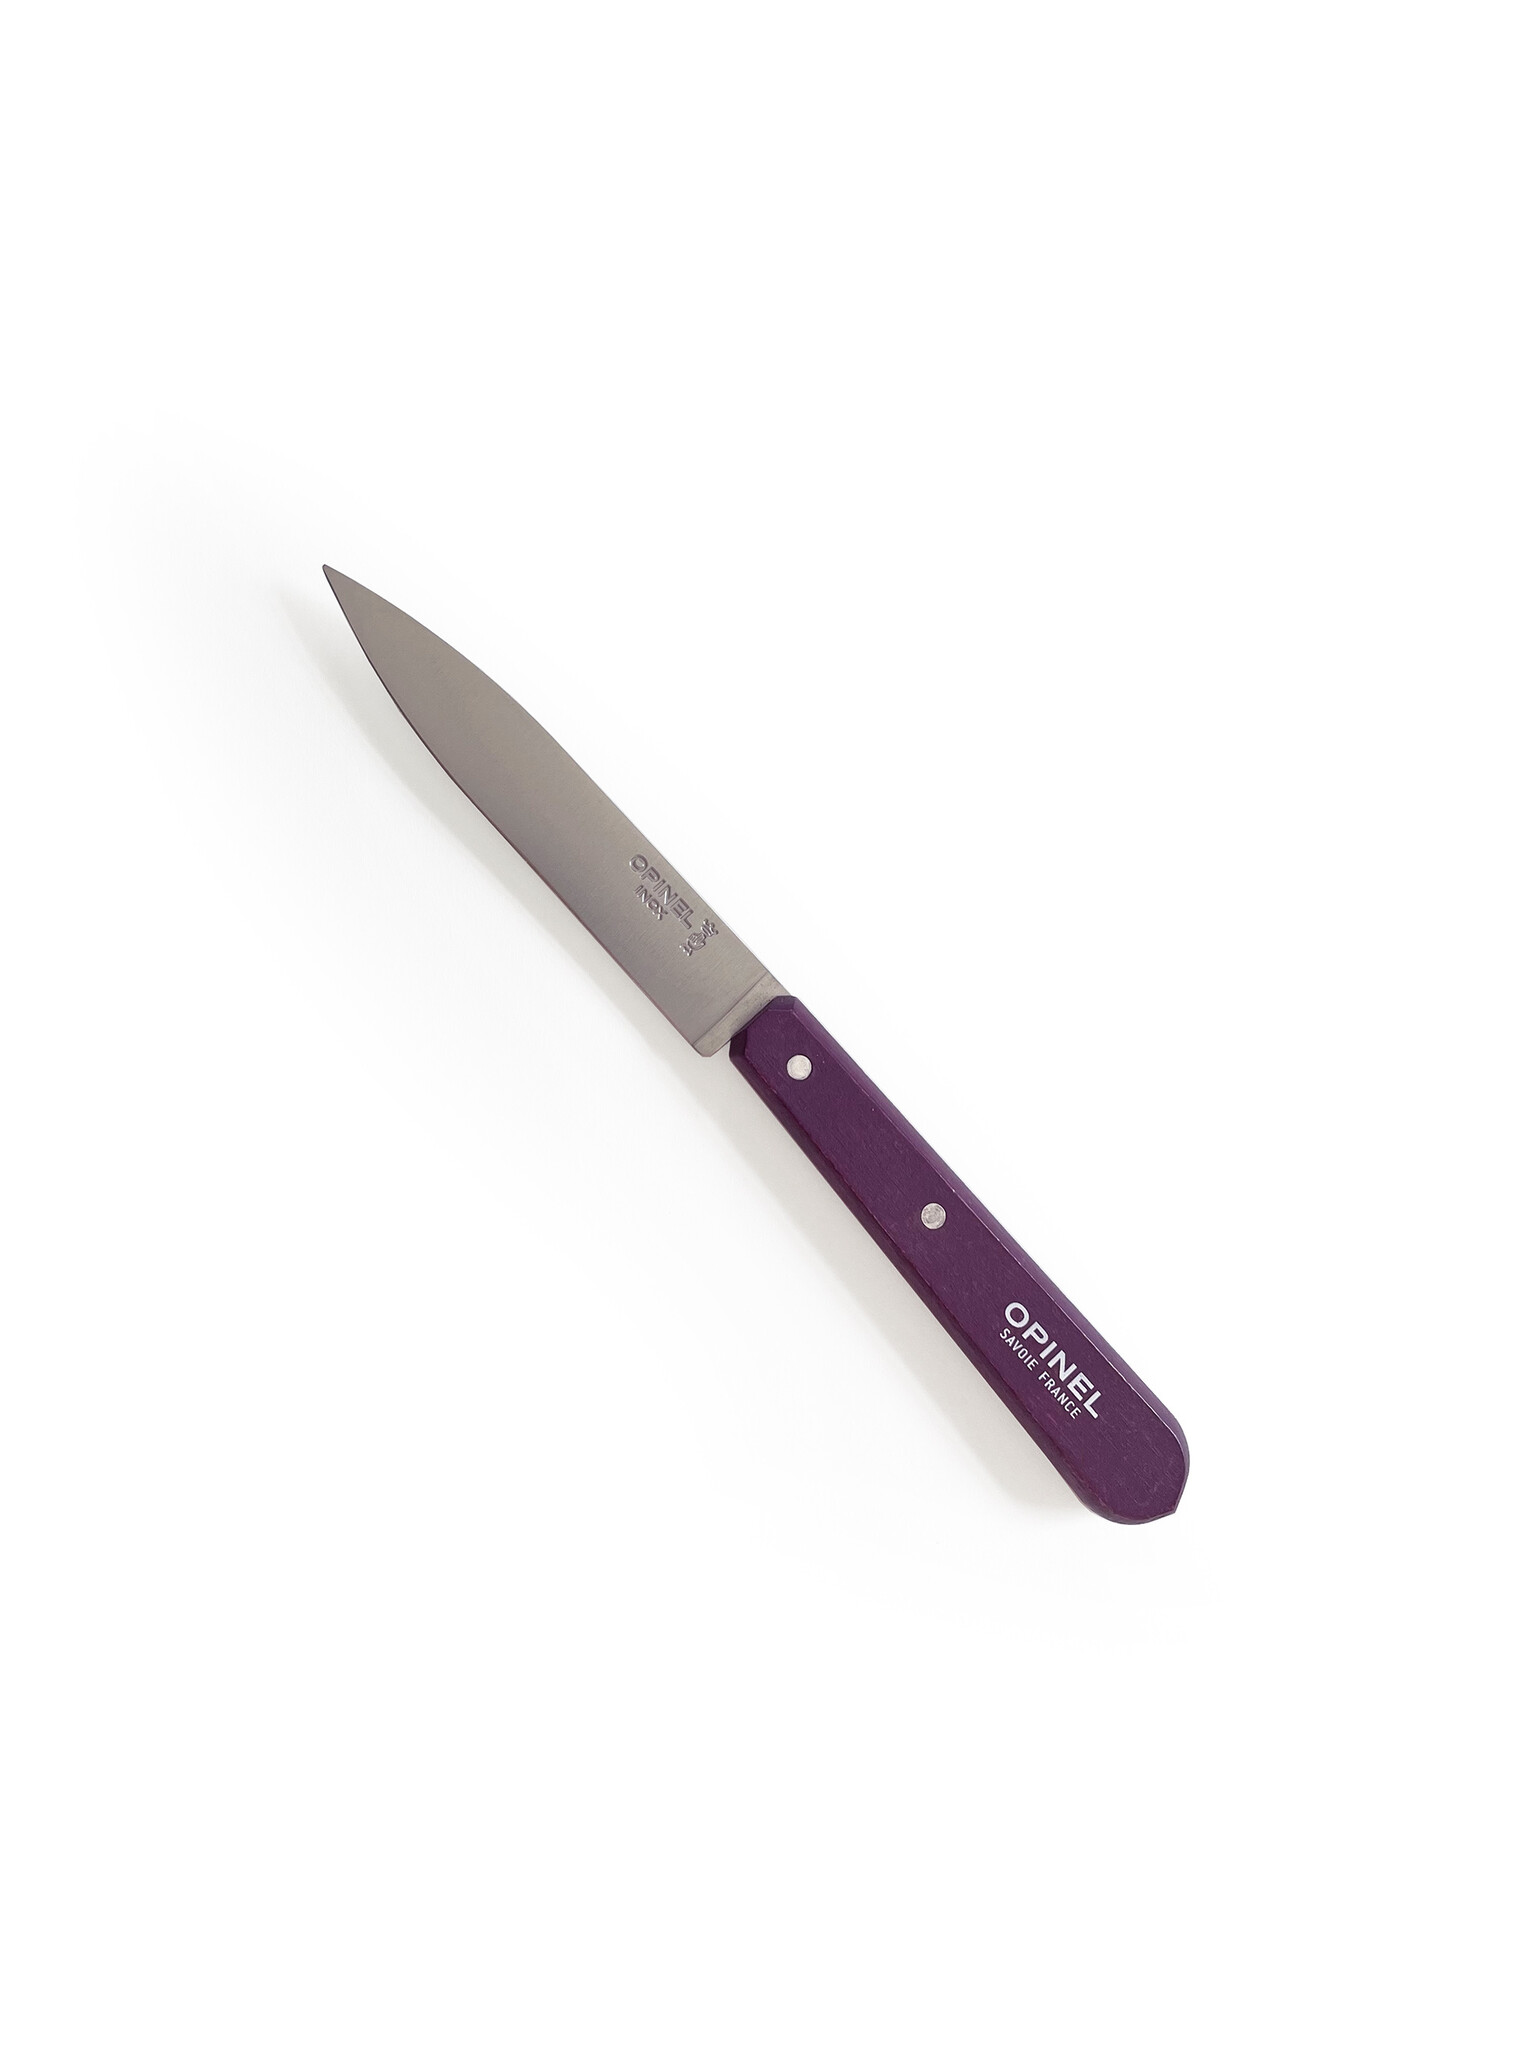 Opinel 112 Plum Paring Knife with Wood Handle-1